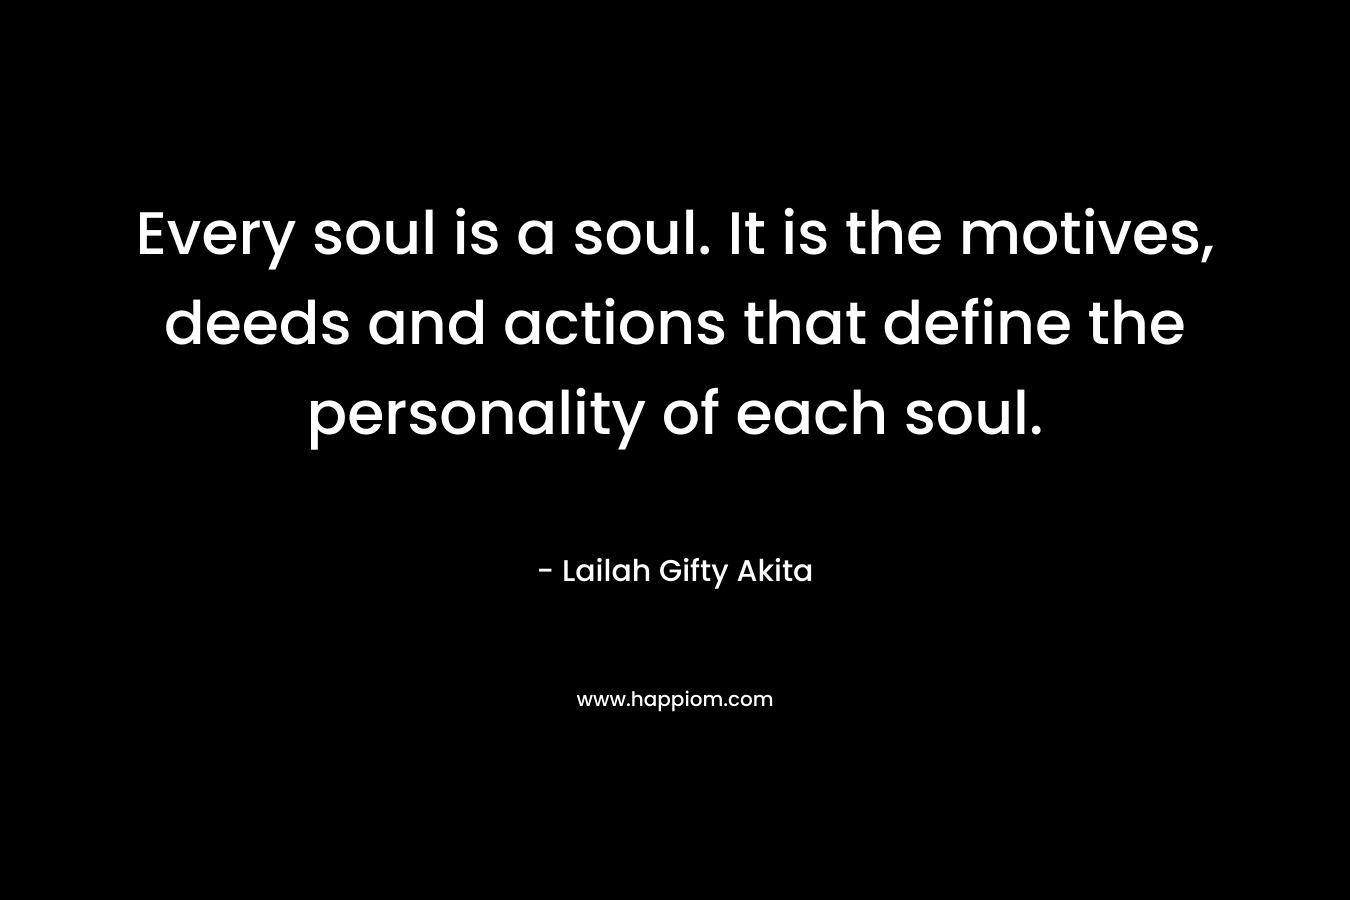 Every soul is a soul. It is the motives, deeds and actions that define the personality of each soul.